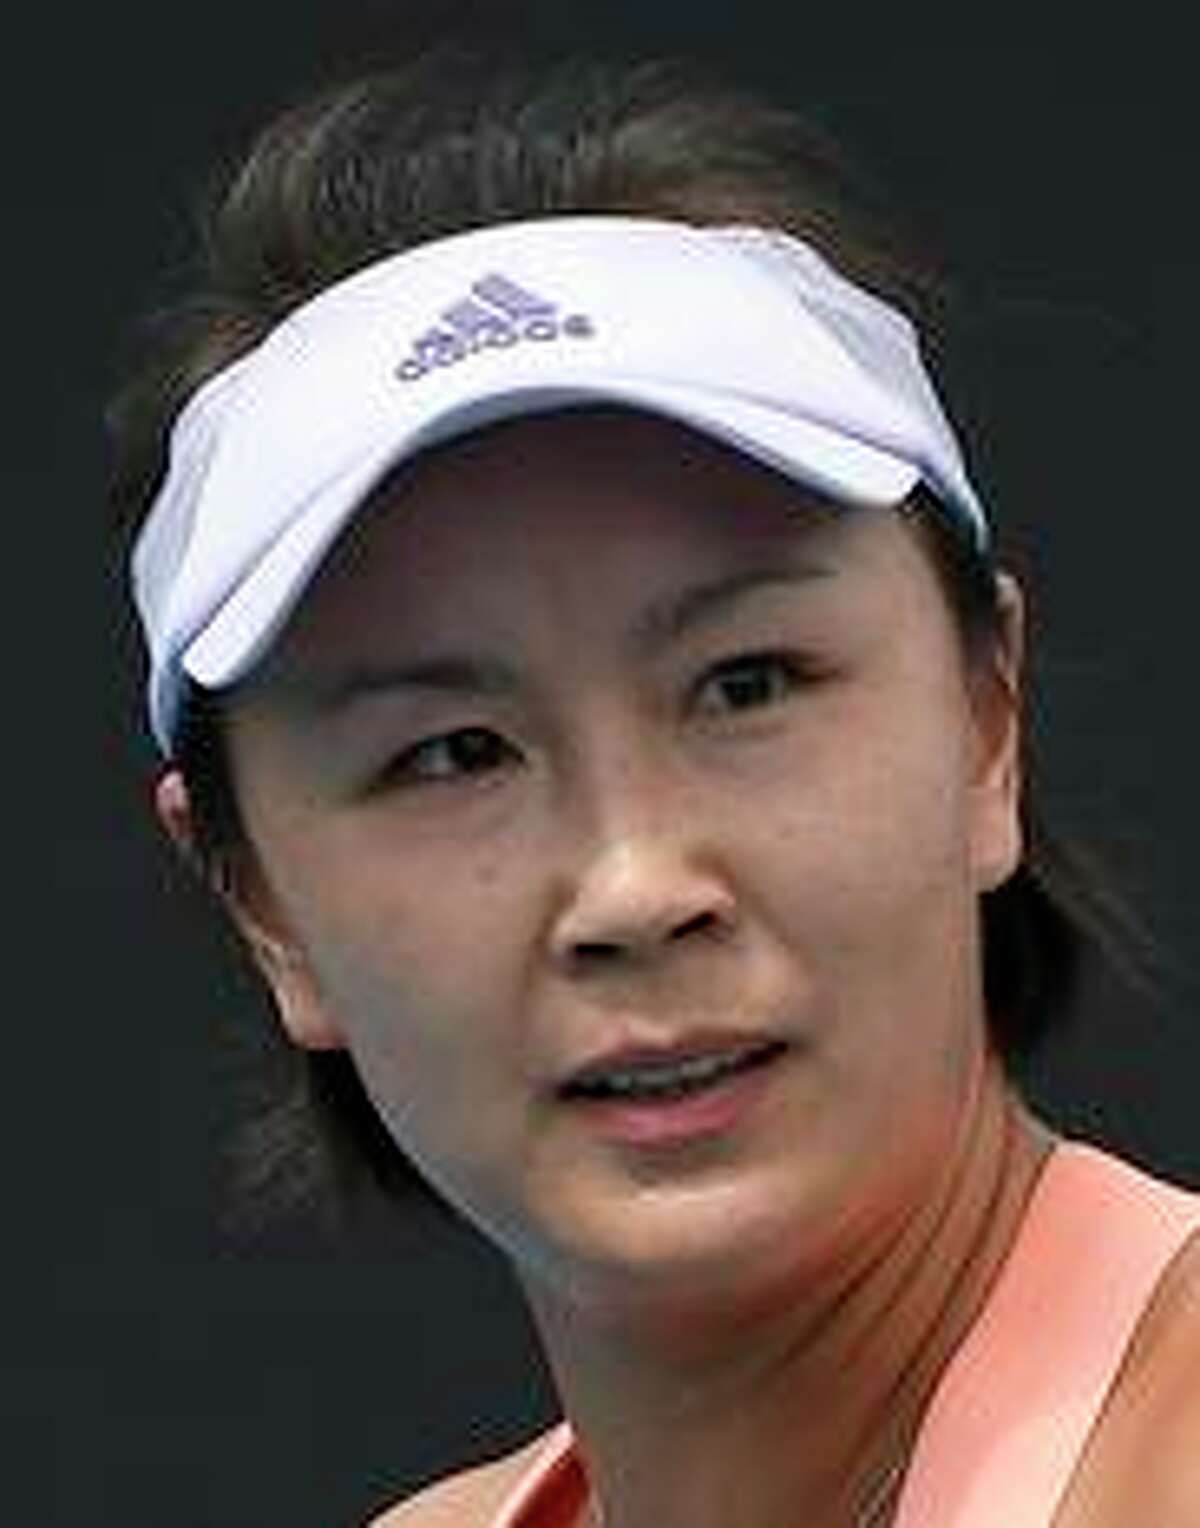 Peng Shuai of China has not played in a WTA event since early 2020.